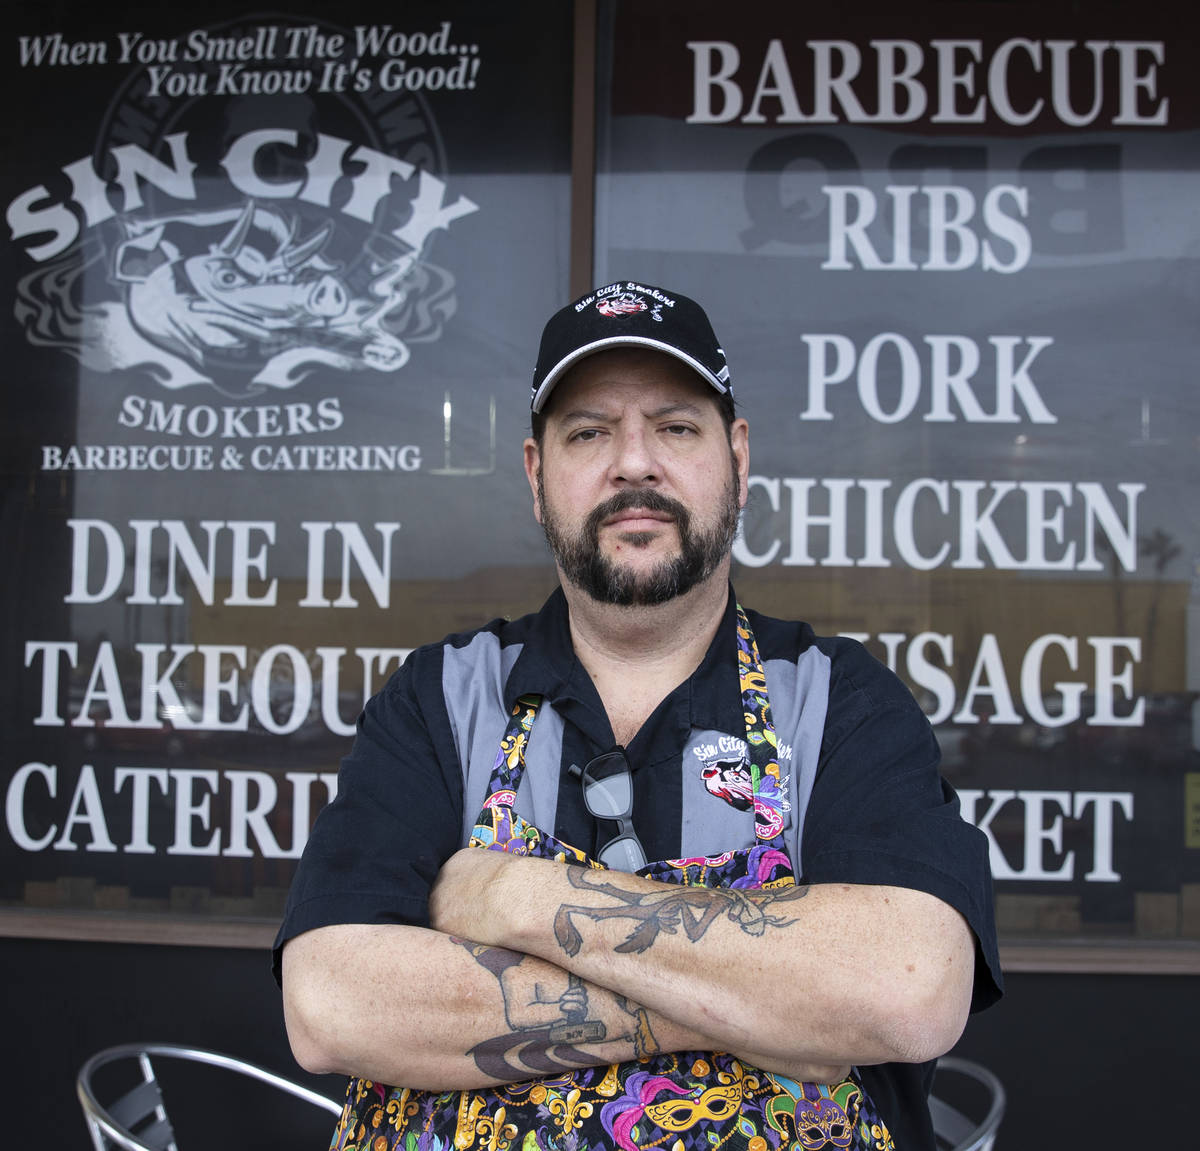 Steve Overlay, owner of Sin City Smokers Barbecue and Catering, poses for a photo outside of hi ...